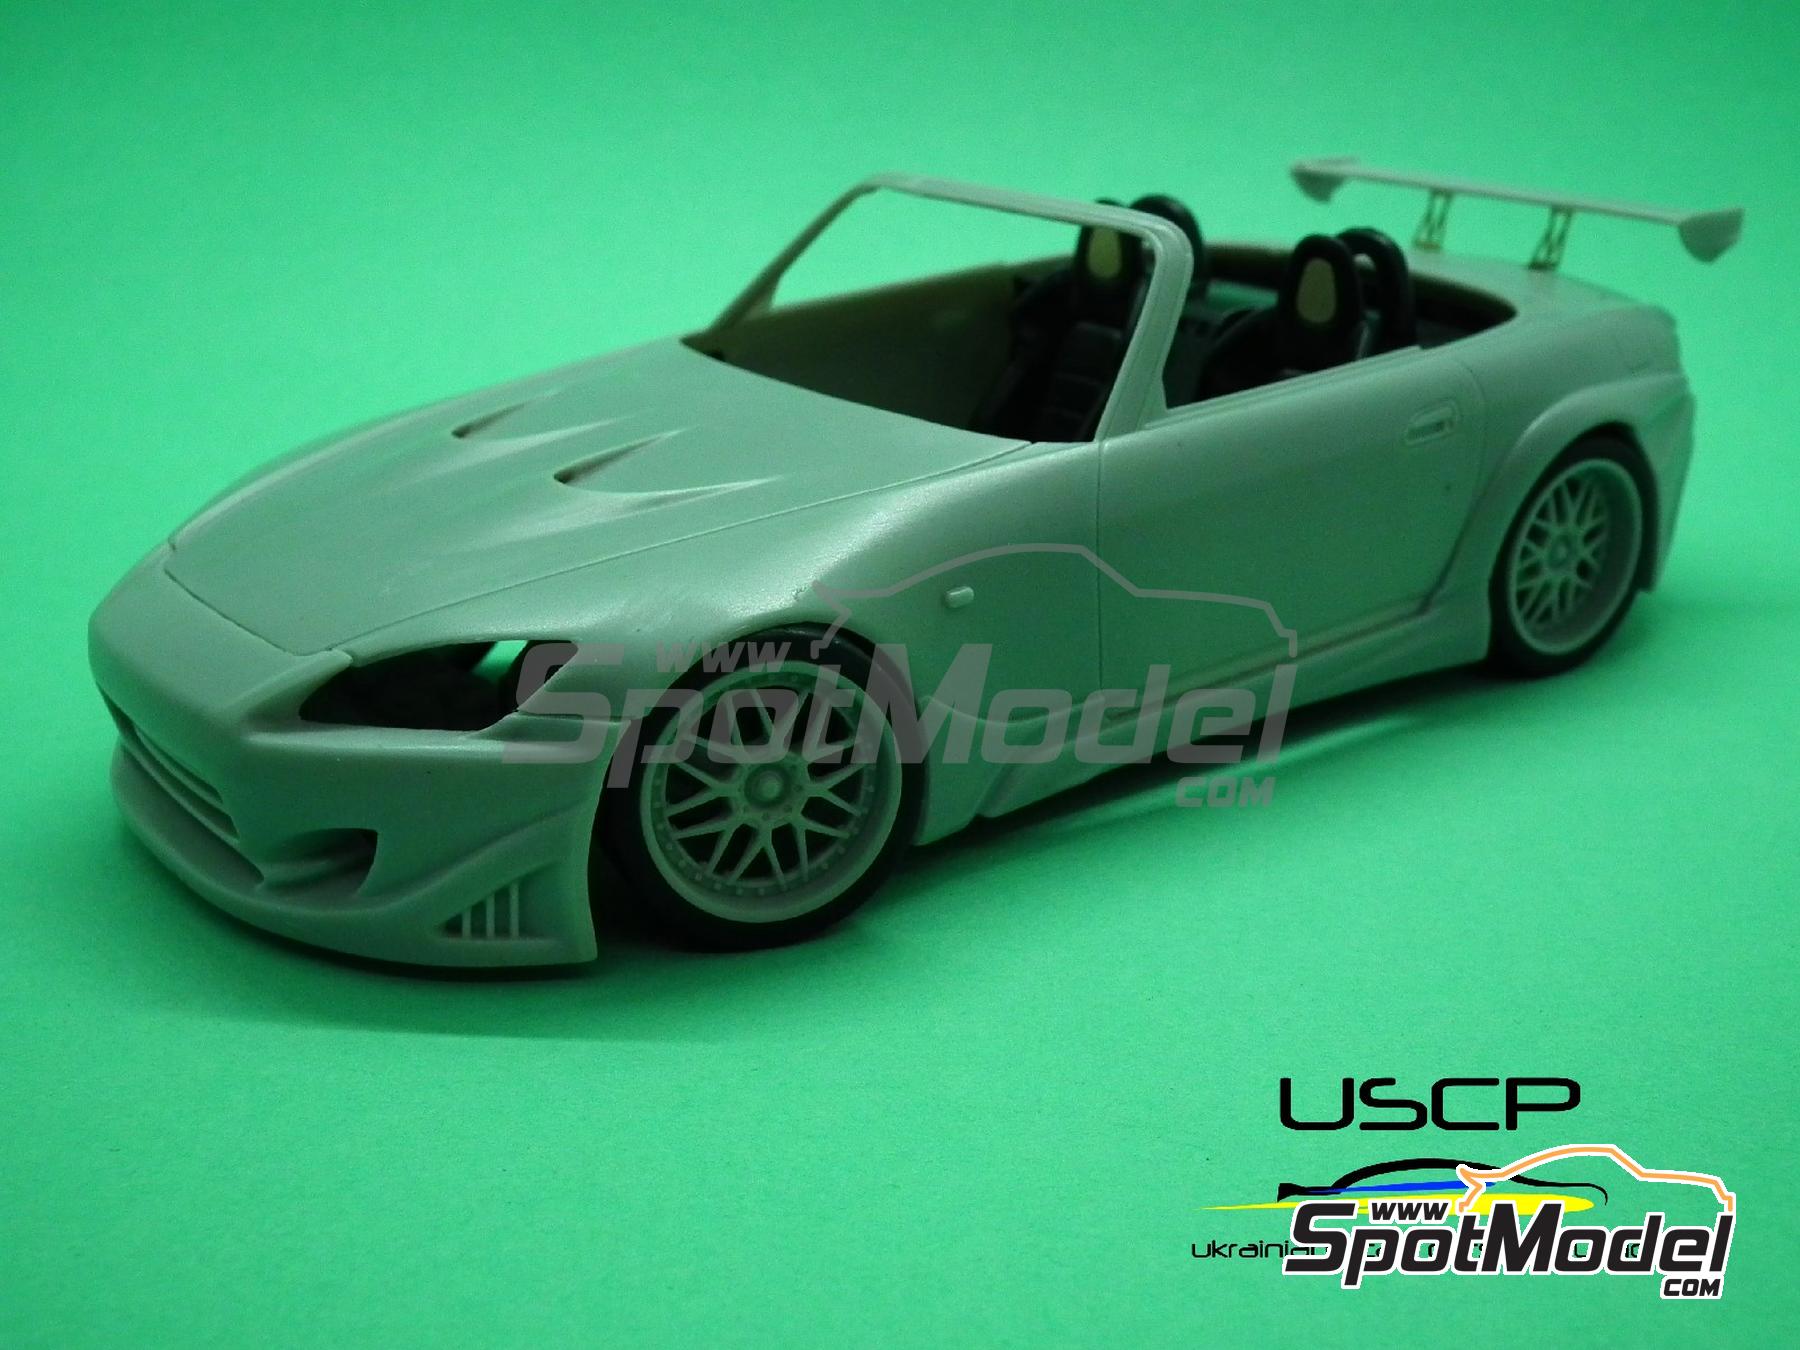 USCP 24T042: Transkit 1/24 scale - Honda S2000 sponsored by The